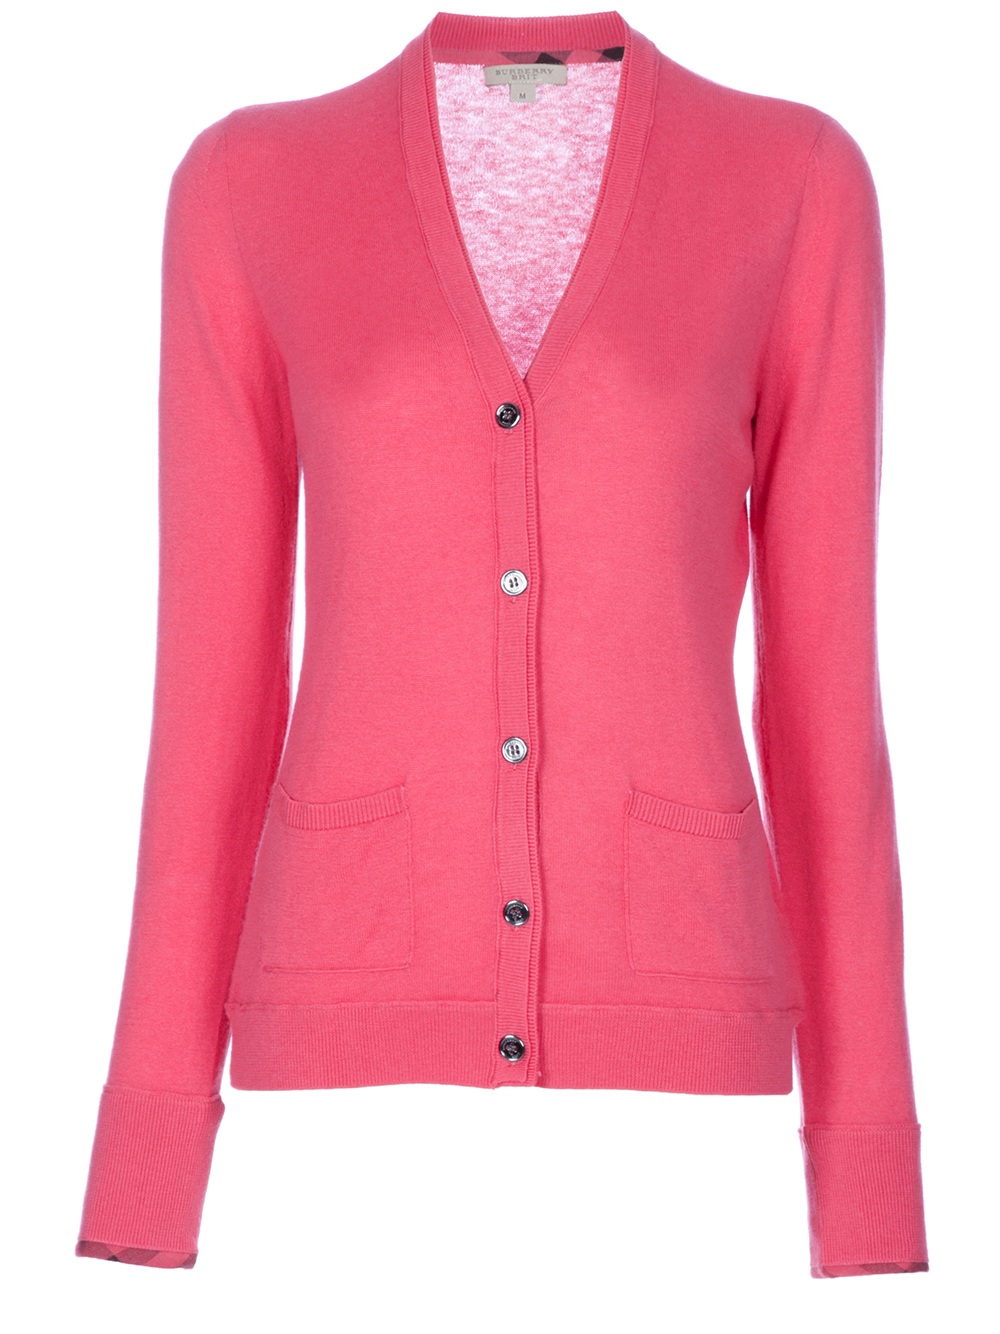 Burberry Brit Cashmere Cotton Cardigan in Pink | Lyst